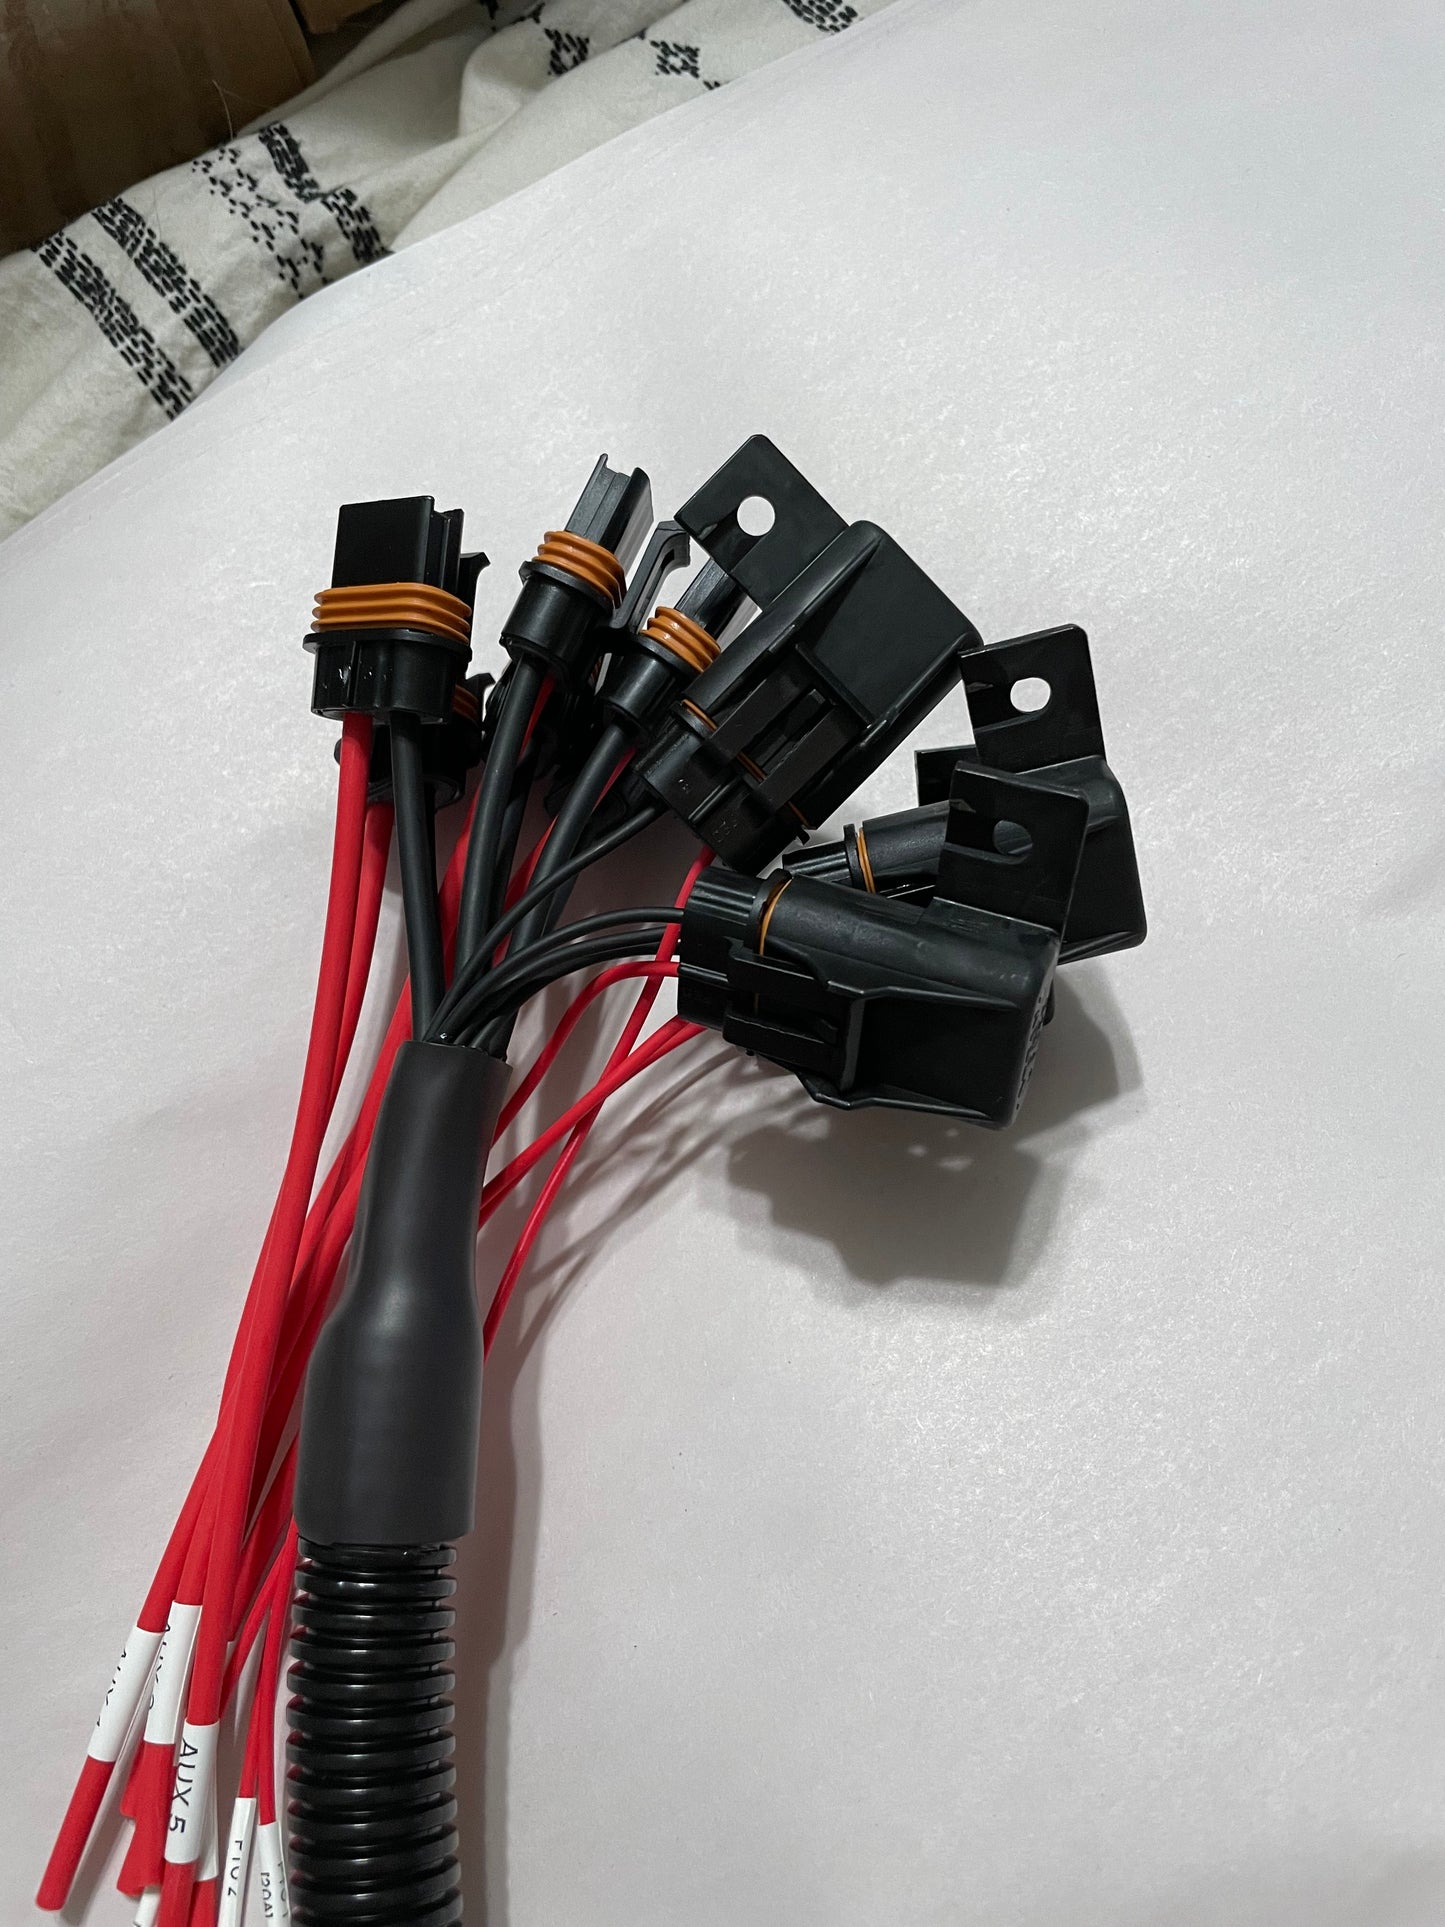 Upfitter Wiring Harness Cap for unused plugs(not for original f150 harness)